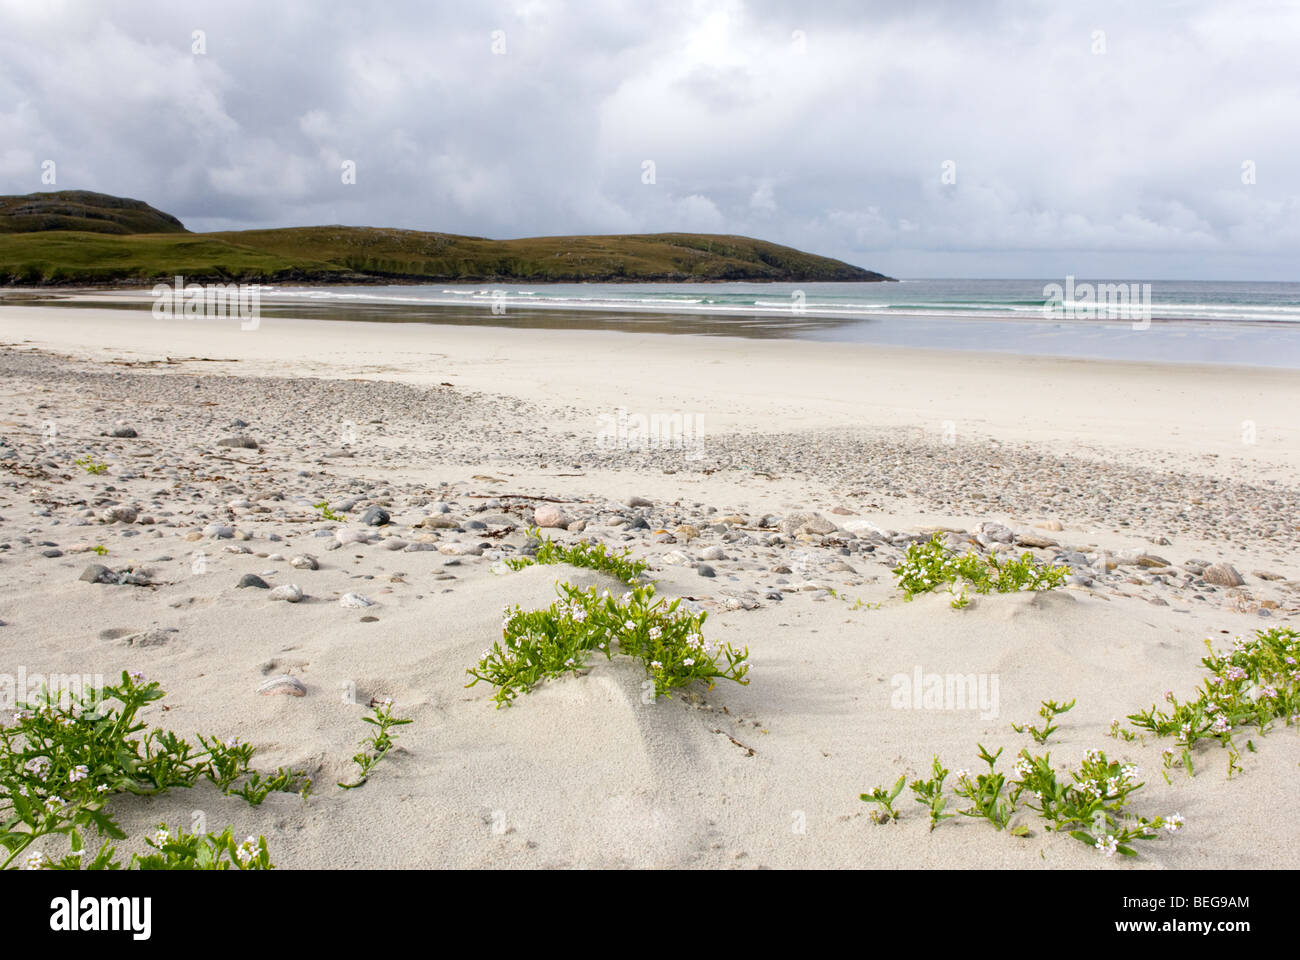 Traigh Siar beach, Isle of Vatersay, Outer Hebrides, Scotland. Stock Photo